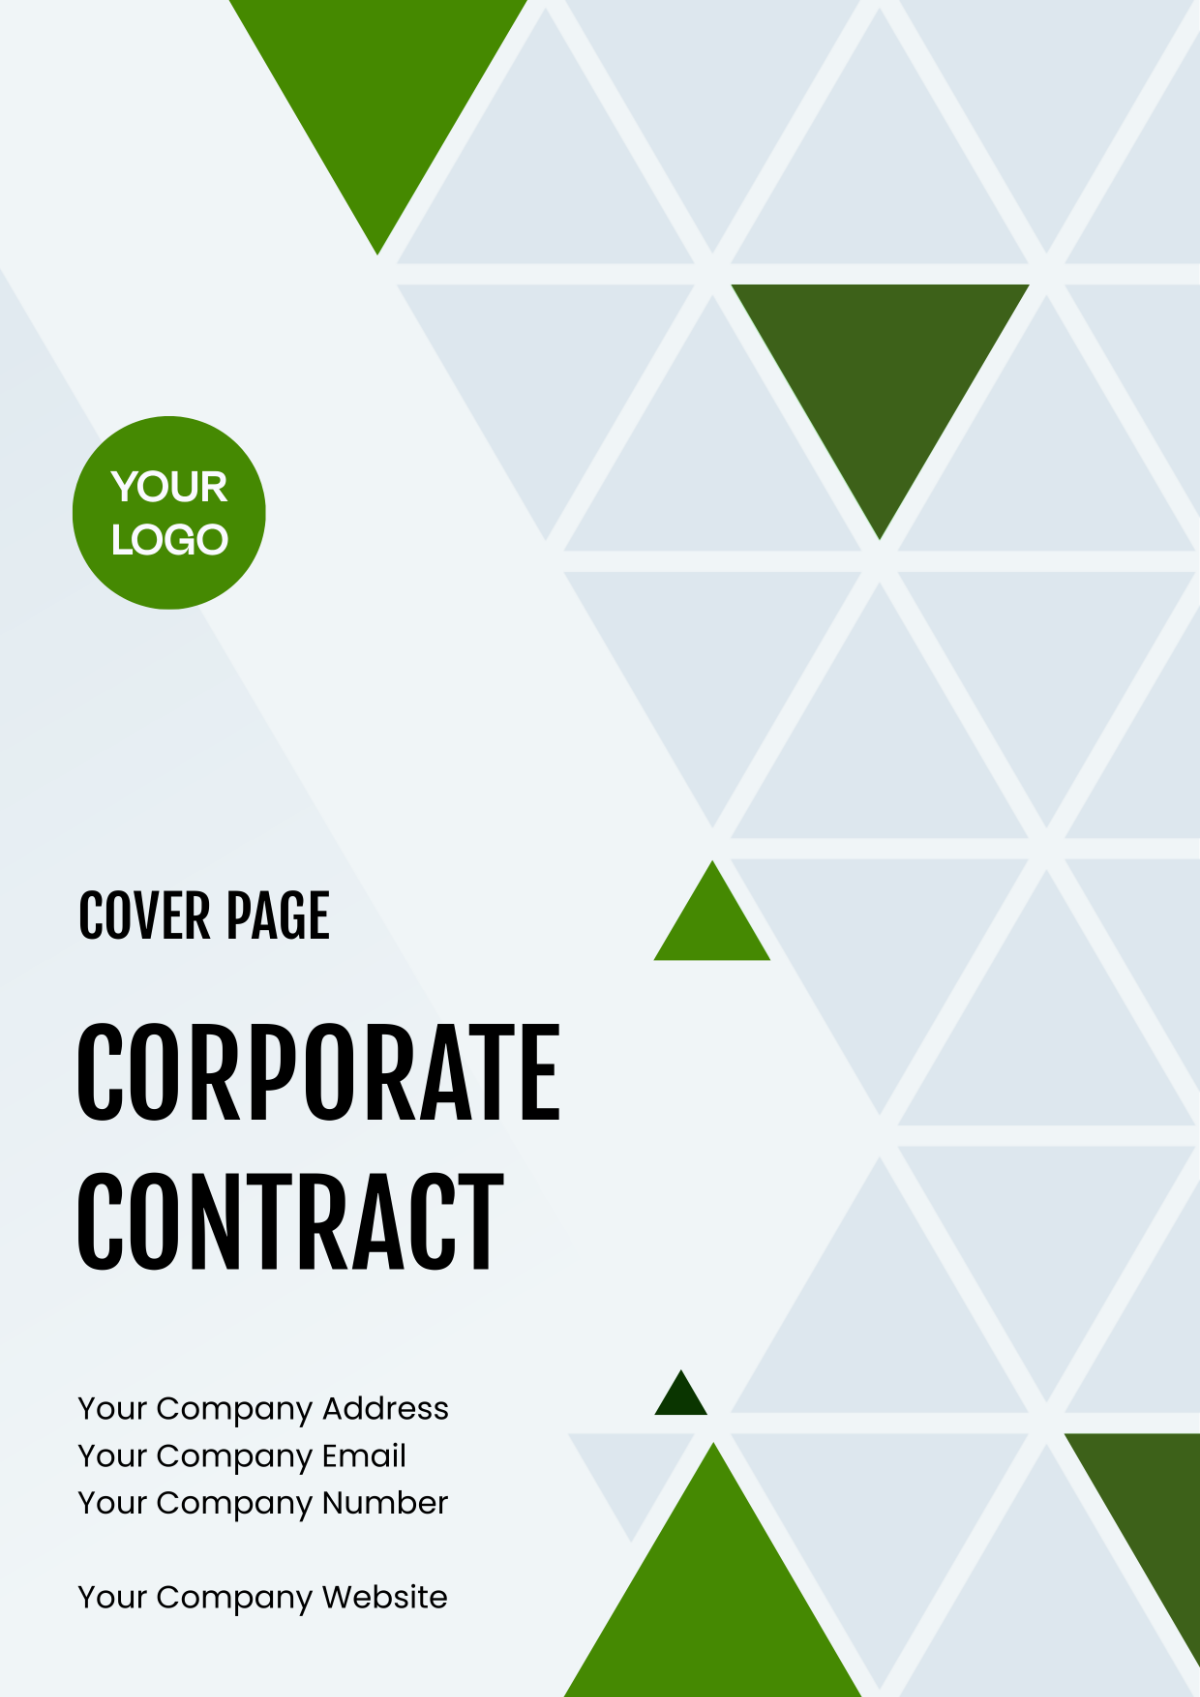 Corporate Contract Cover Page